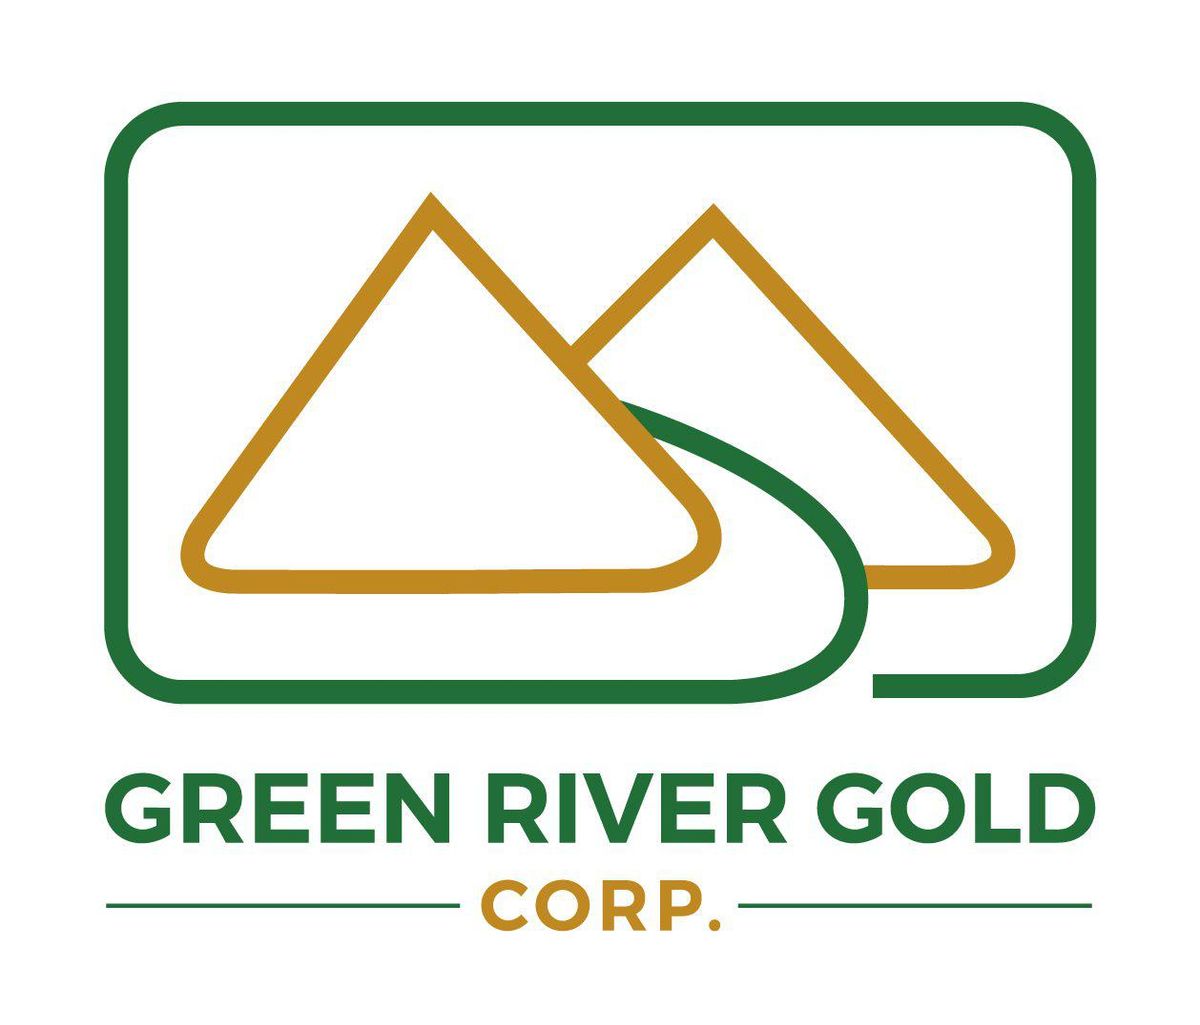 Green River Gold Corp. Intercepts 17.80% Magnesium, 0.18% Nickel, and 0.15% Chromium Starting at Surface